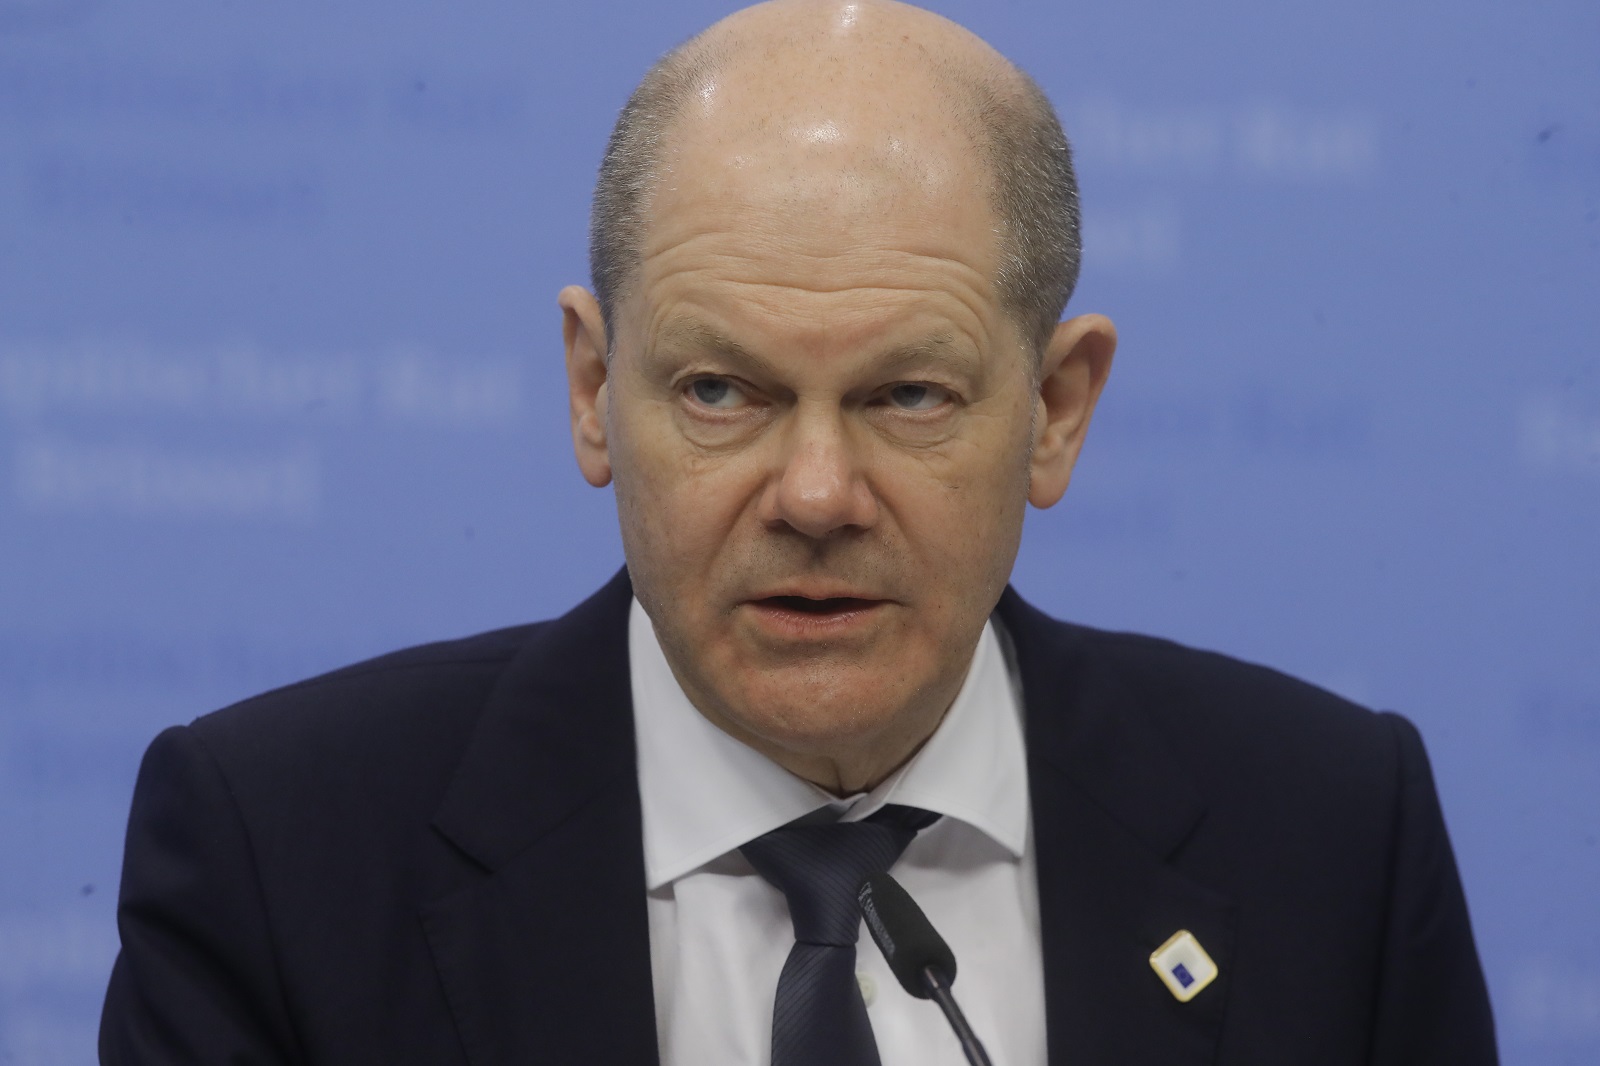 epa09849597 German Chancellor Olaf Scholz gives a press conference at the end of a two day European Council Summit in Brussels, Belgium, 25 March 2022.  EPA/OLIVIER HOSLET